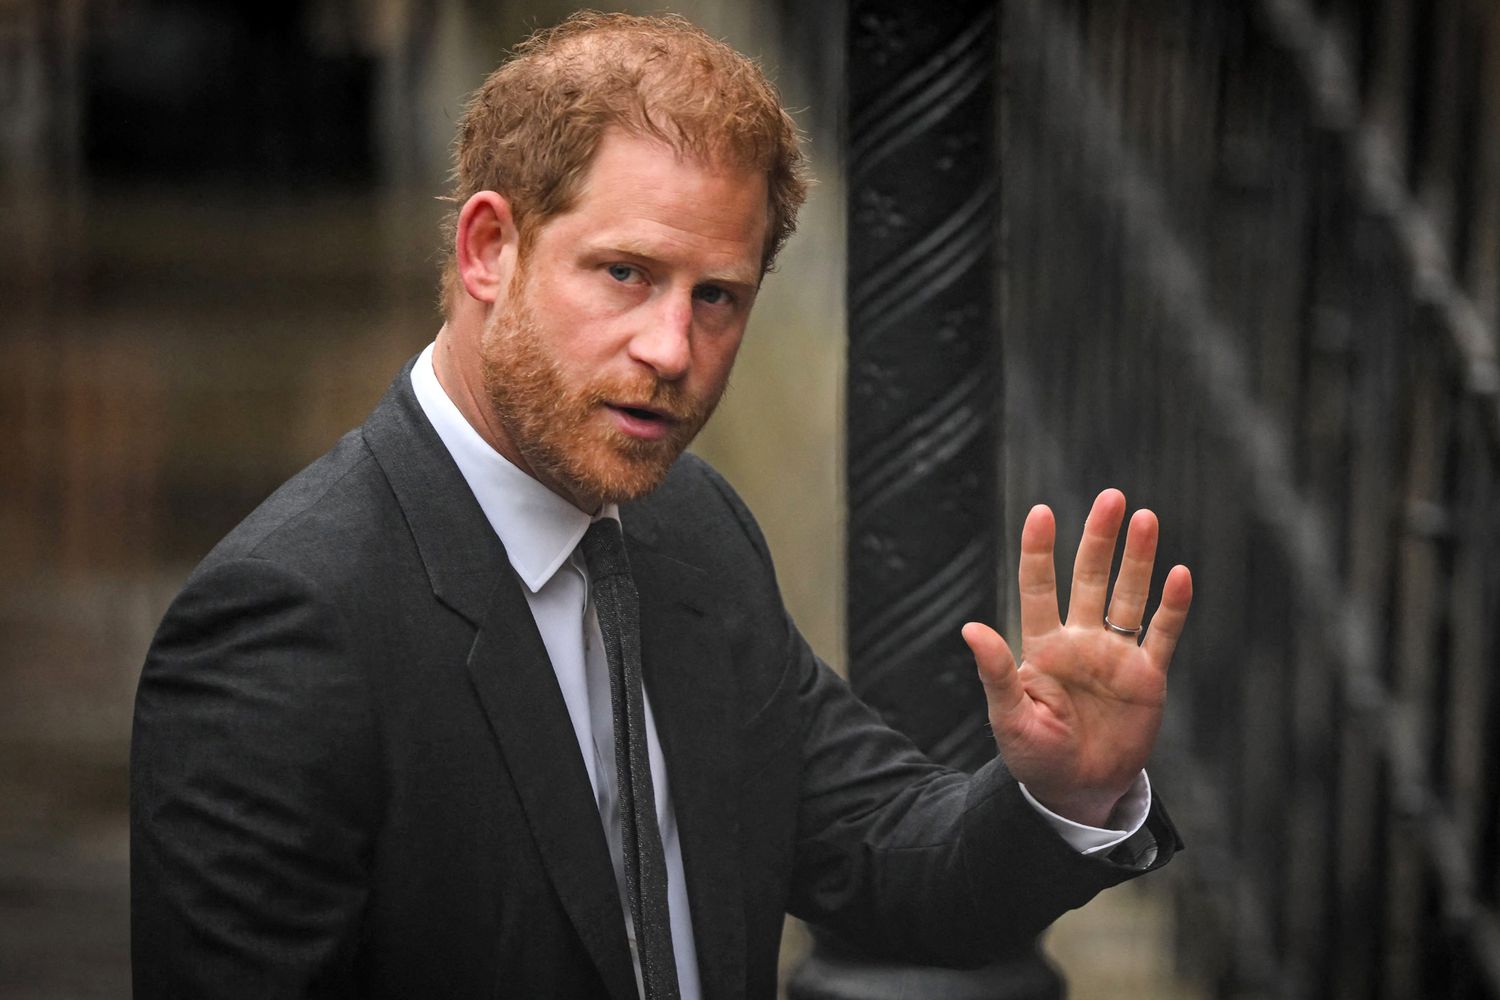 Prince Harry wearing a black suit